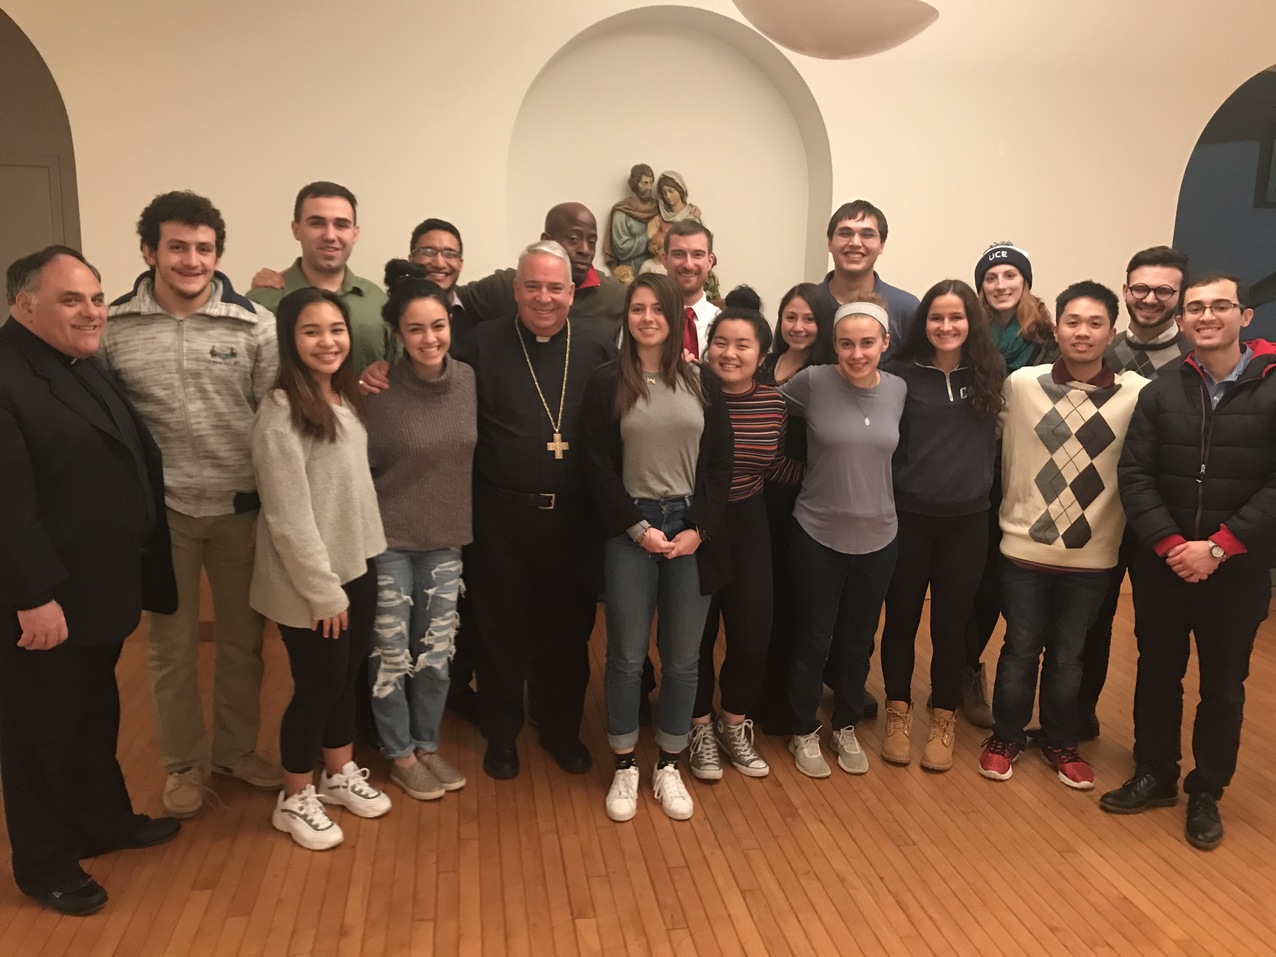 Prayer, food, conversation highlight bishop’s visit with Case Catholic Campus Ministry